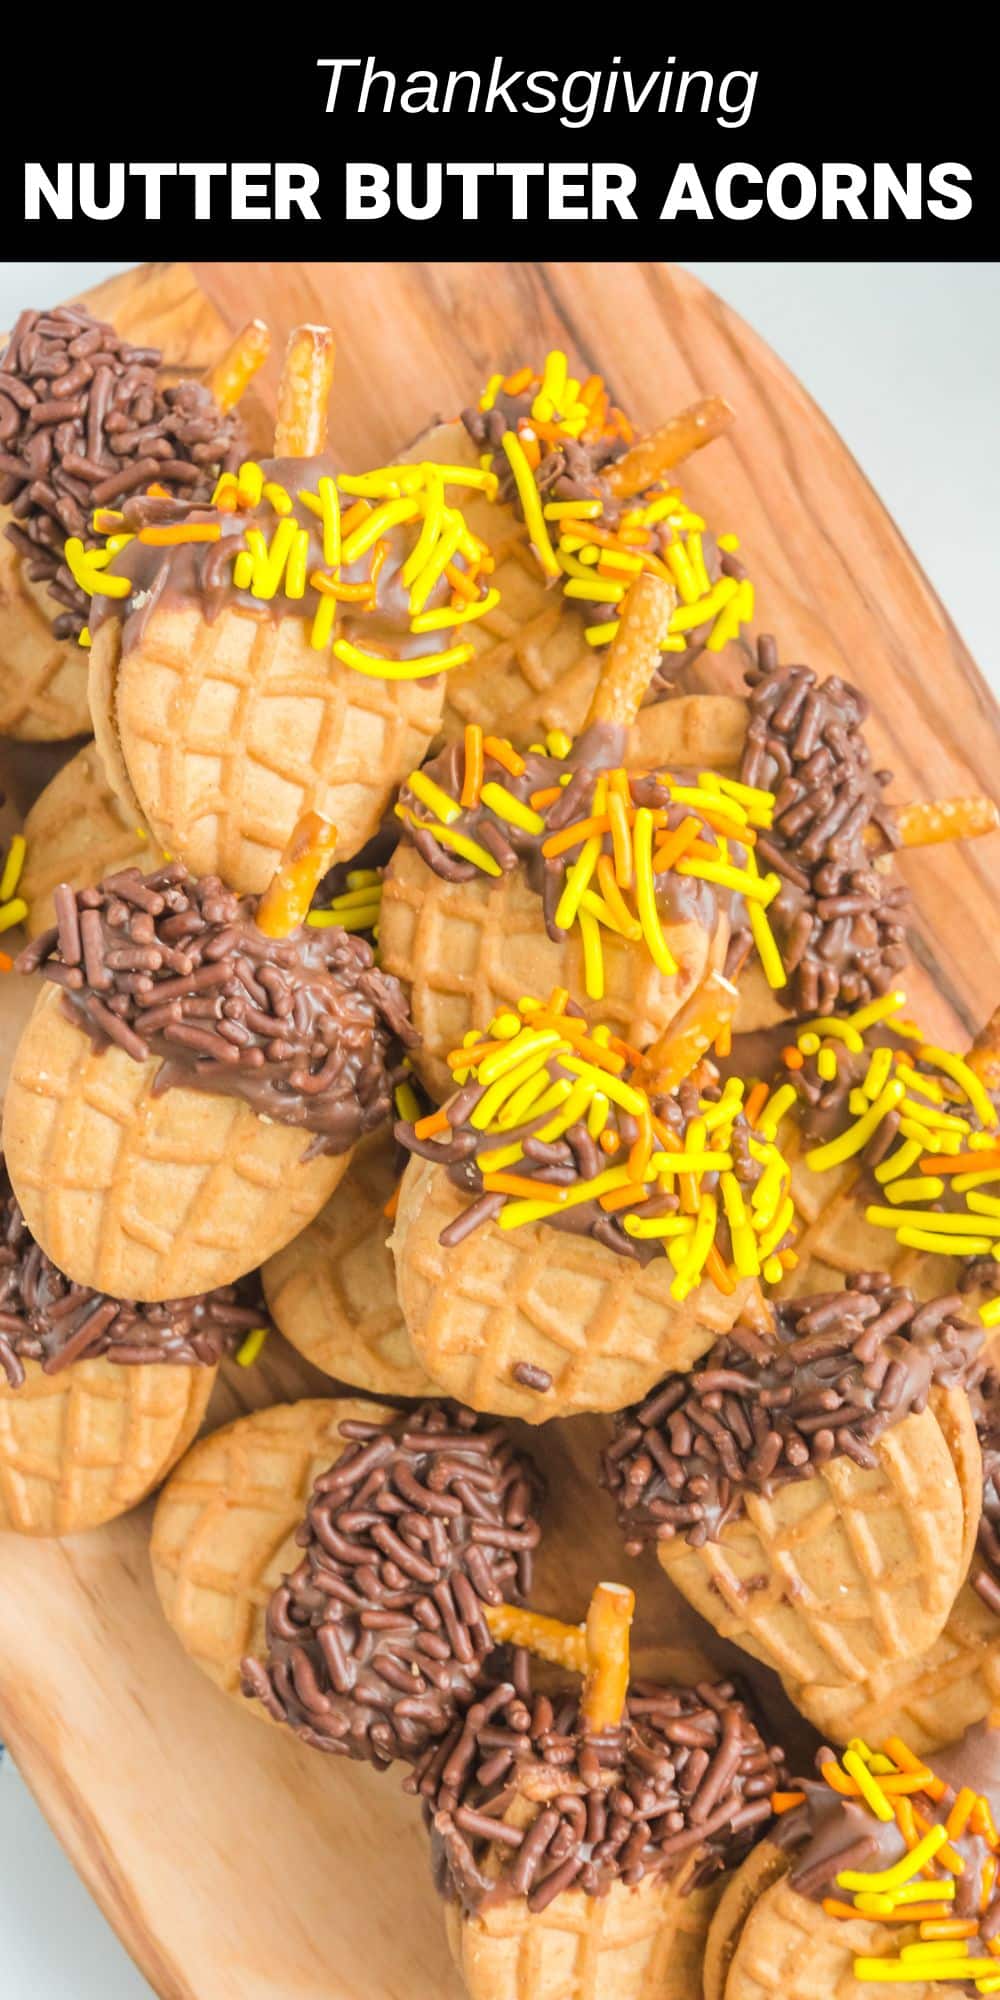 These Nutter Butter acorns are a fun and festive fall treat that’s also super easy to make. Gather the whole family and have a blast creating these adorable and delicious fall acorn cookies together.